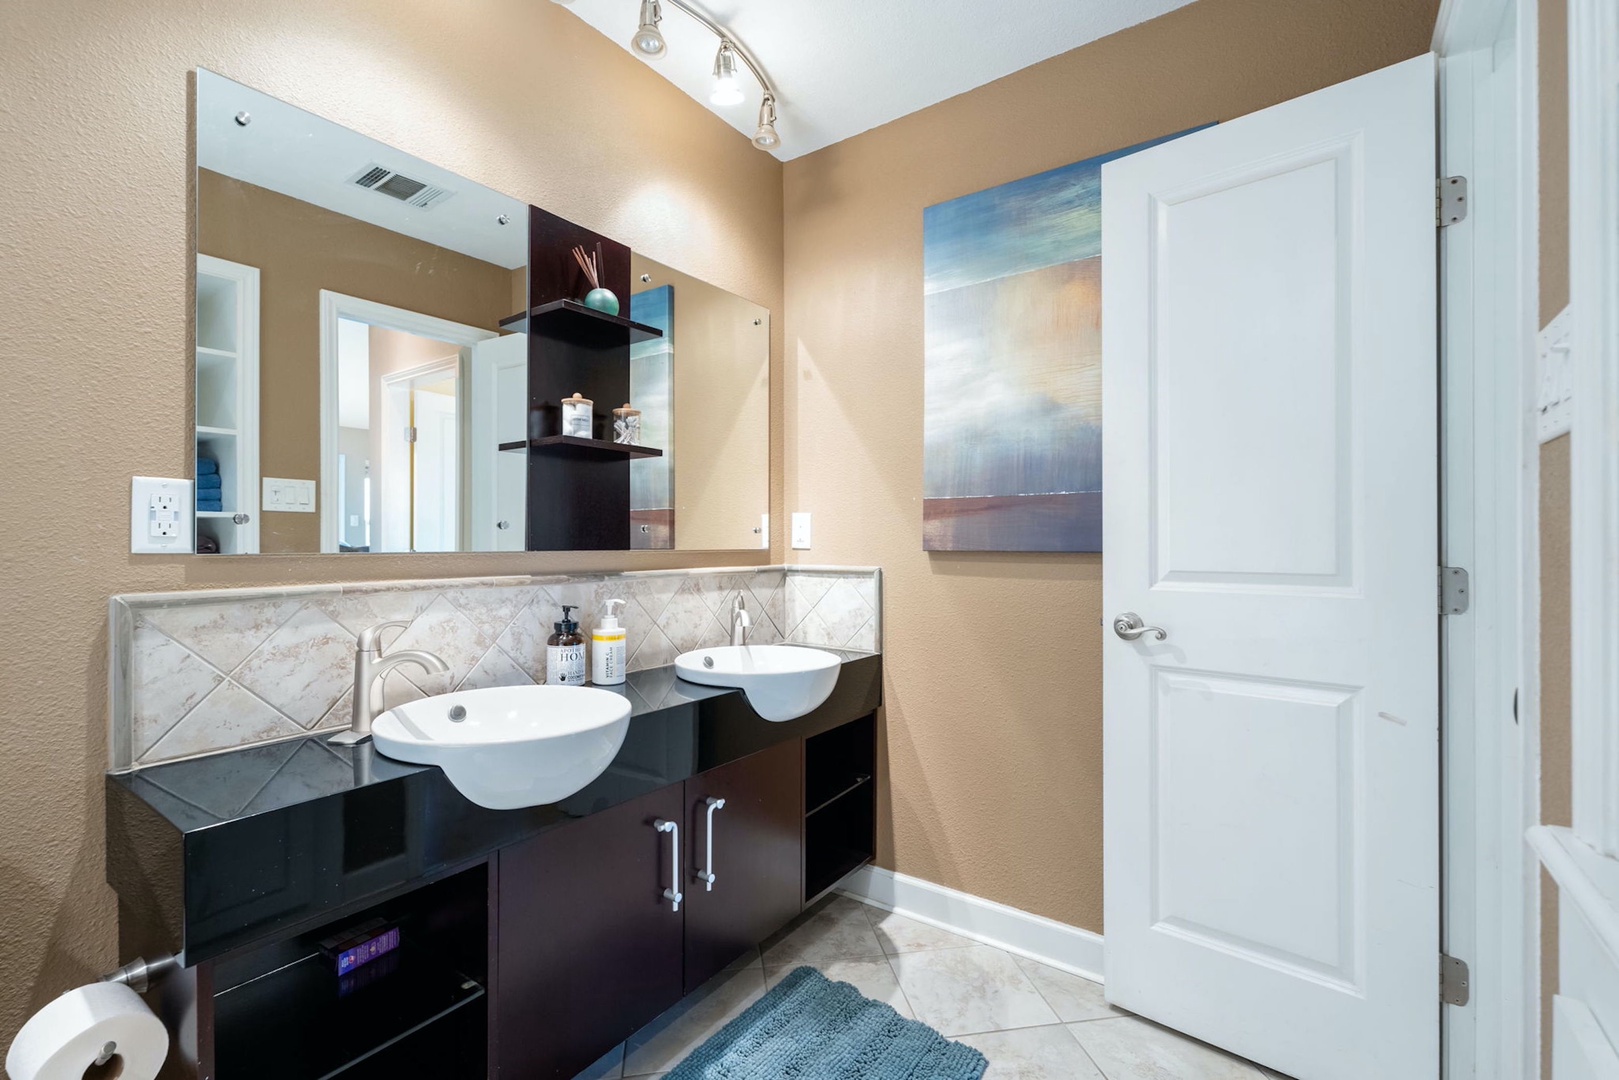 A chic dual vanity & shower/soaking tub combo await in the full bath